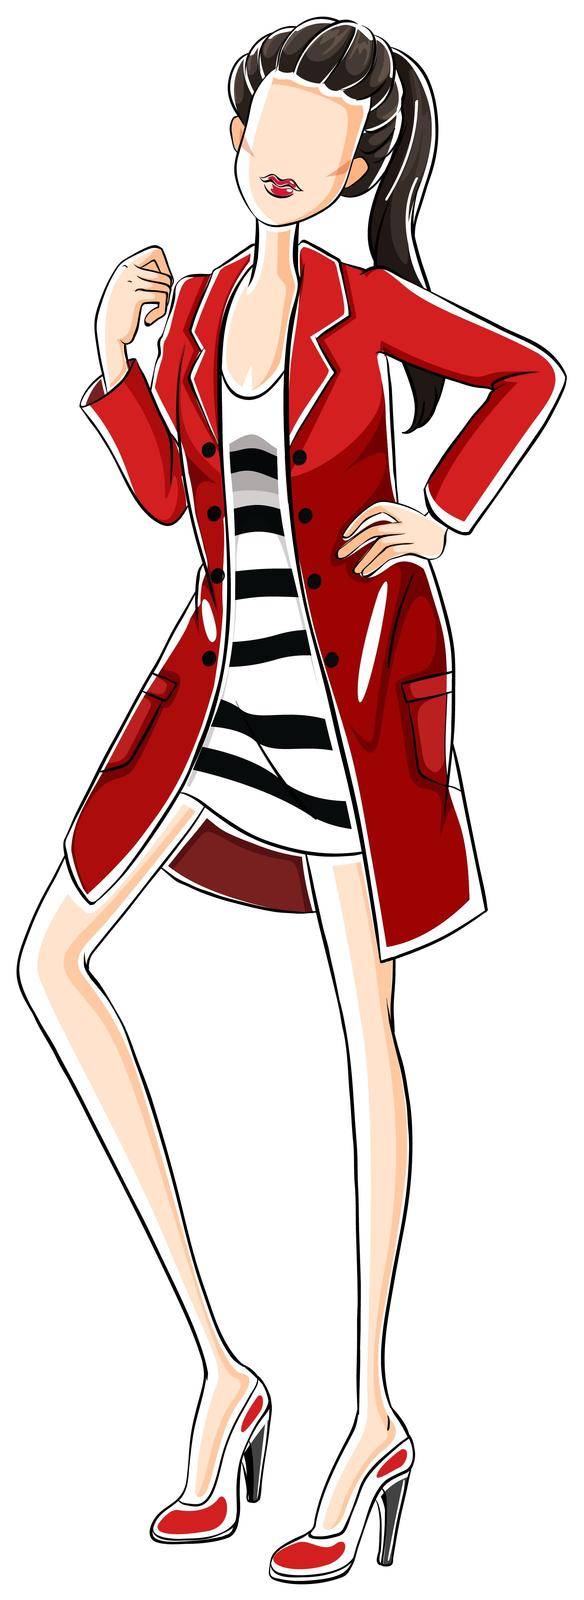 Sketch of a woman in black and white dress with red overcoat